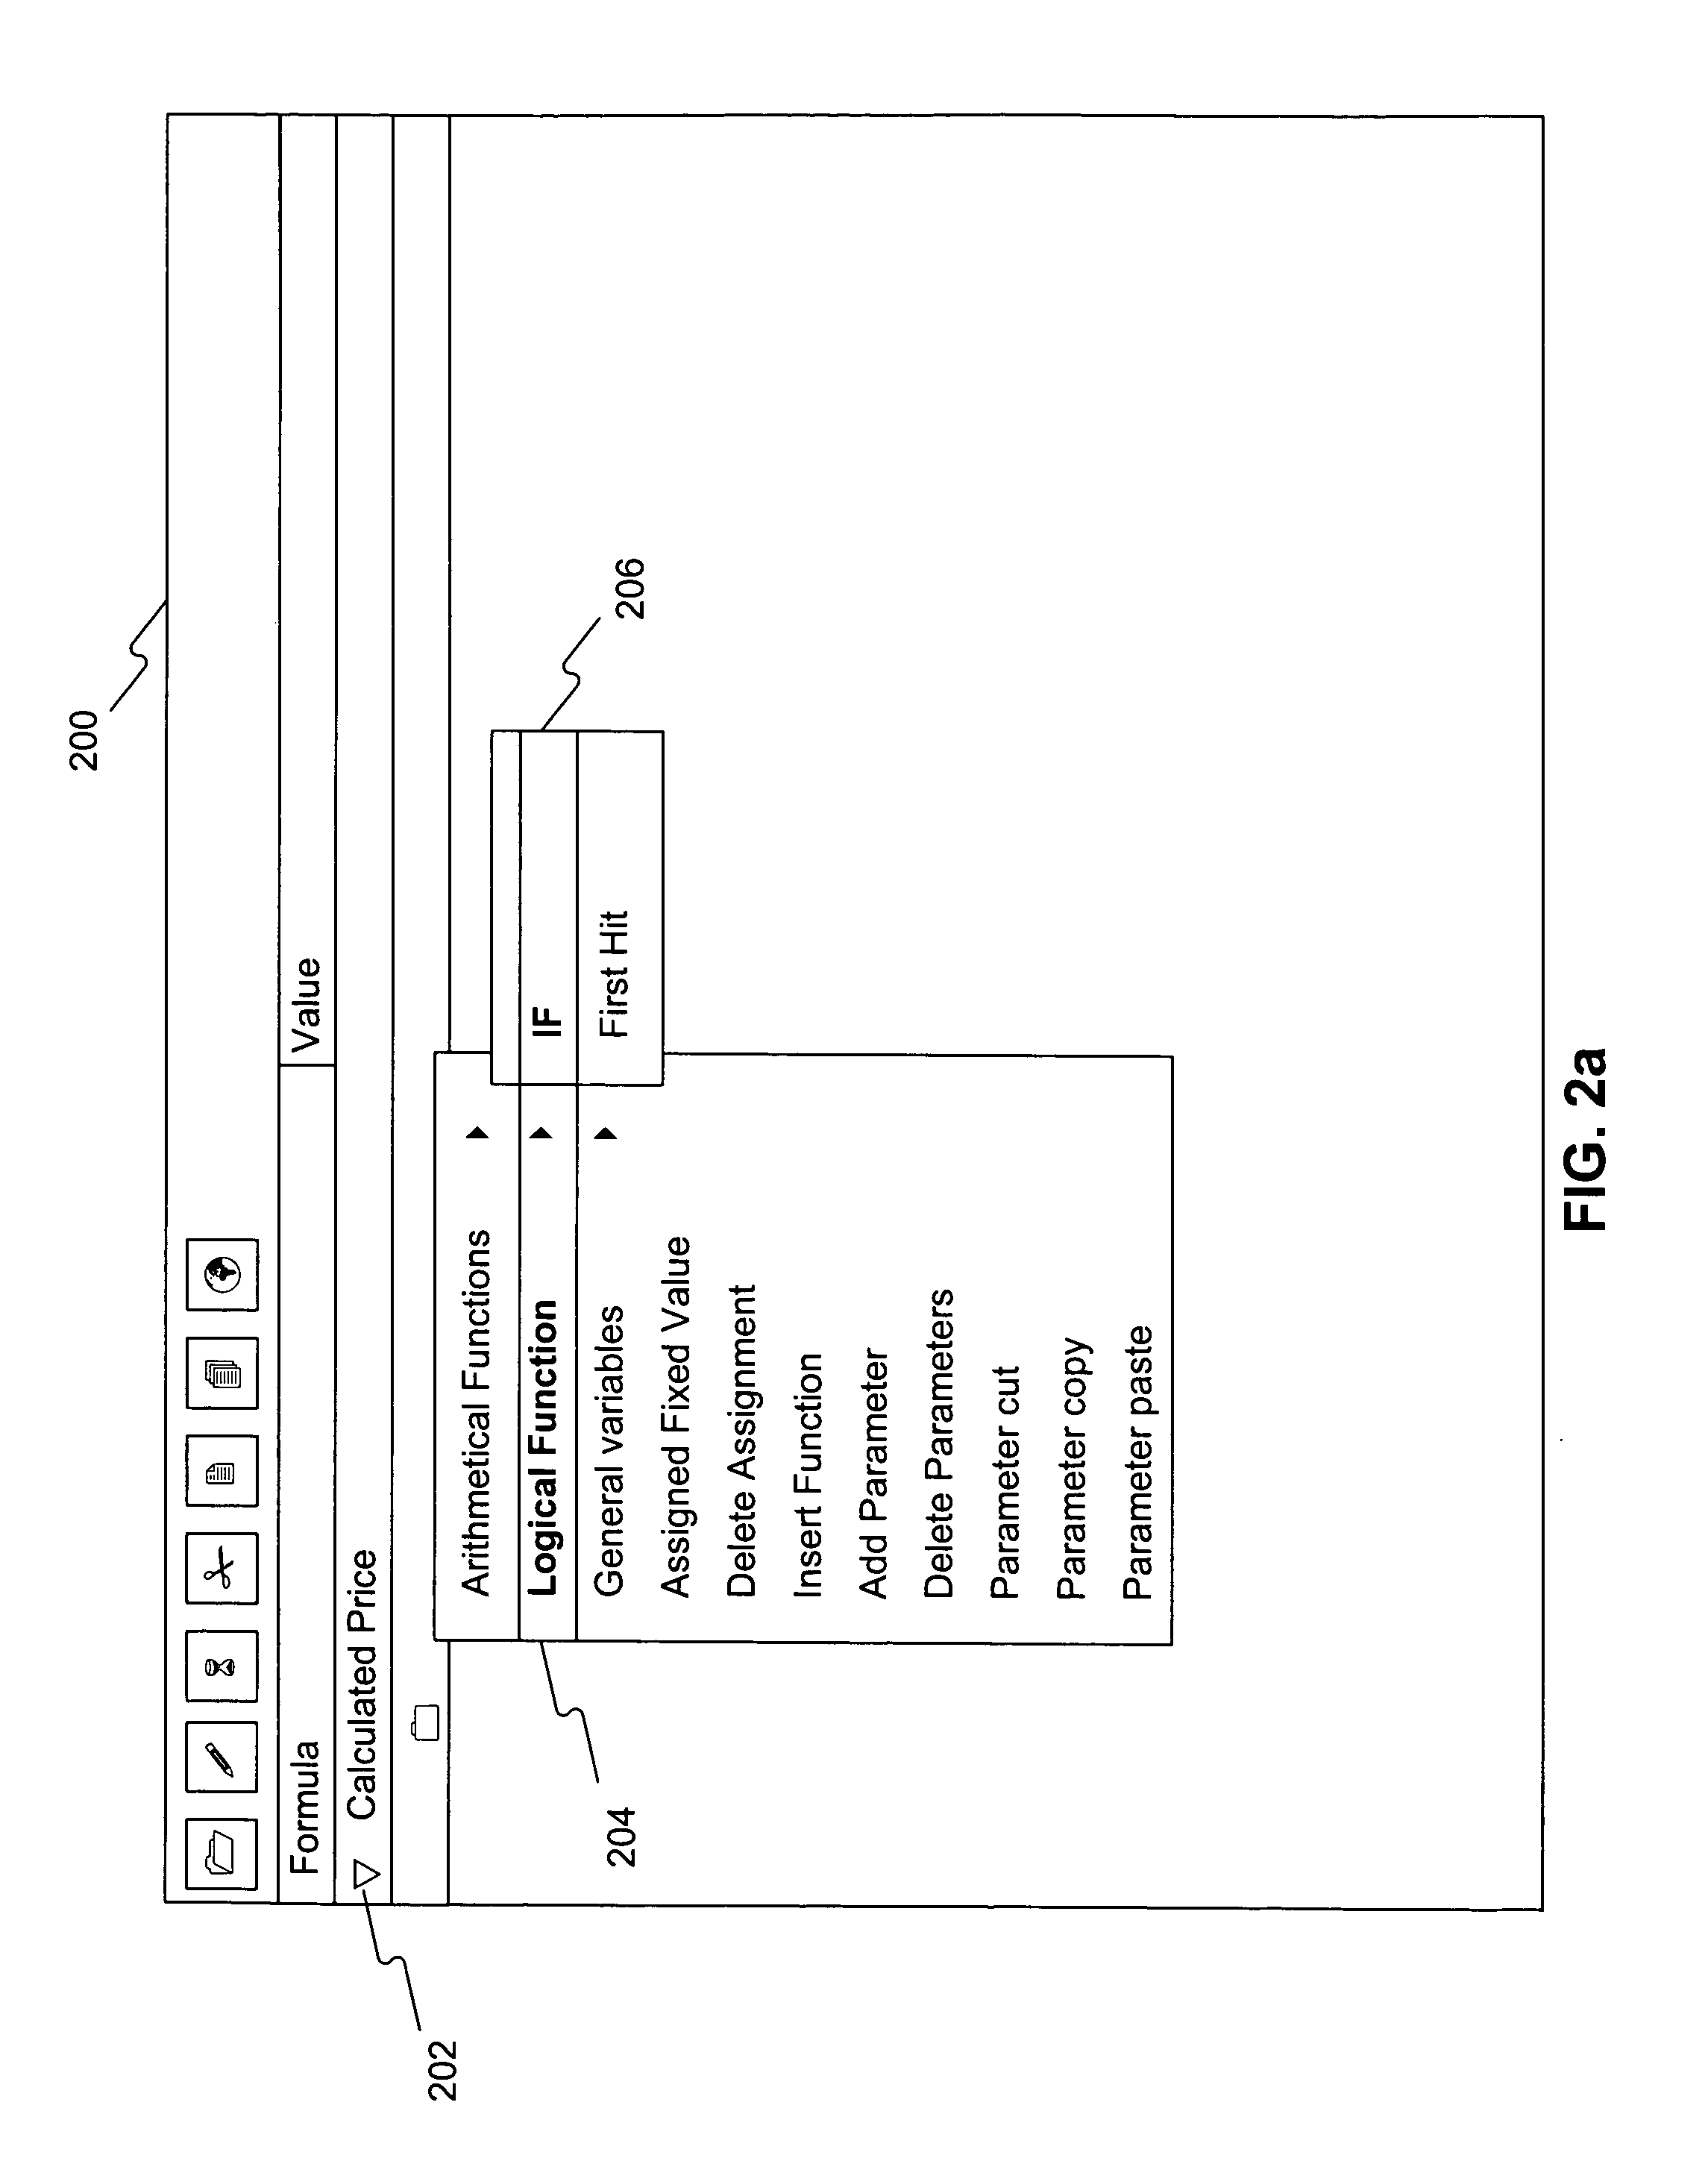 Systems and methods for implementing formulas